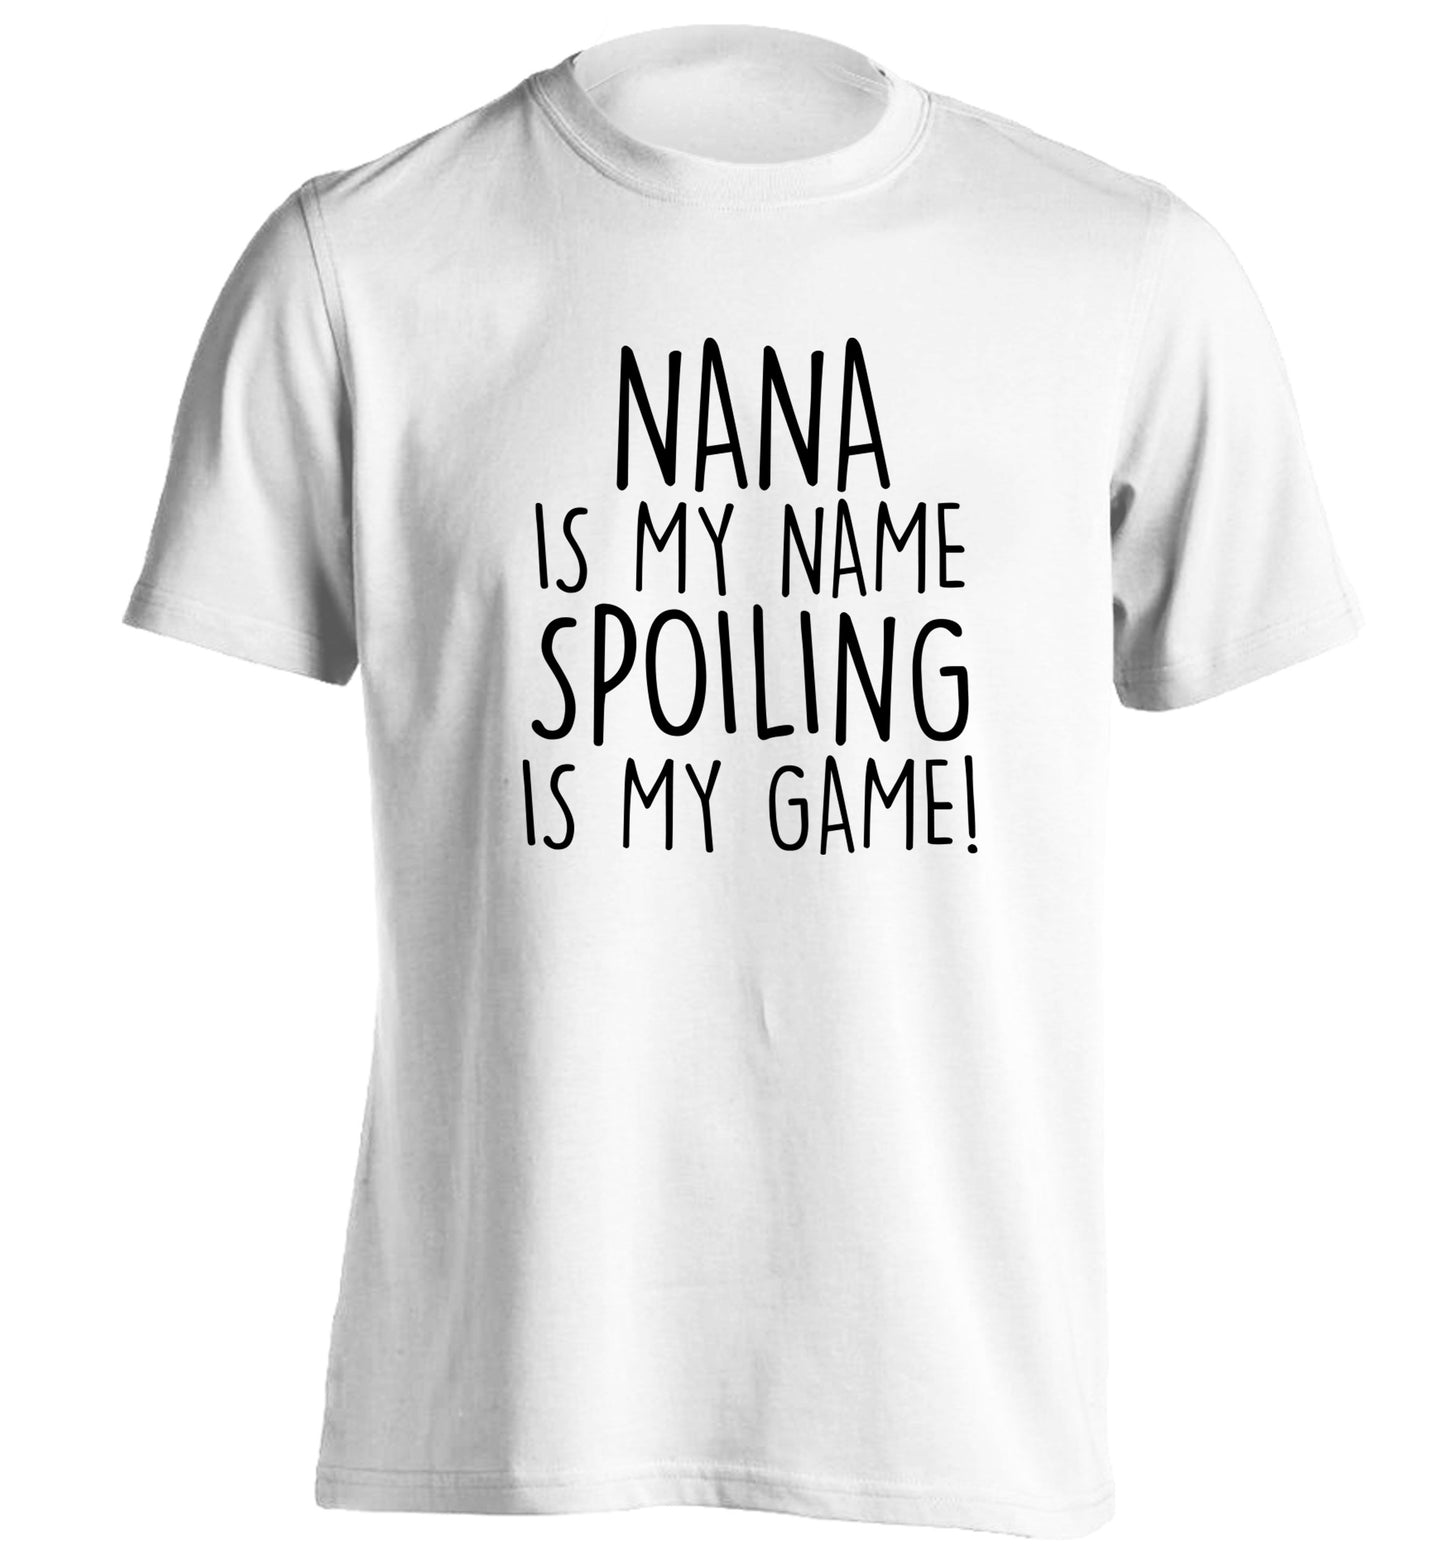 Nana is my name, spoiling is my game adults unisex white Tshirt 2XL